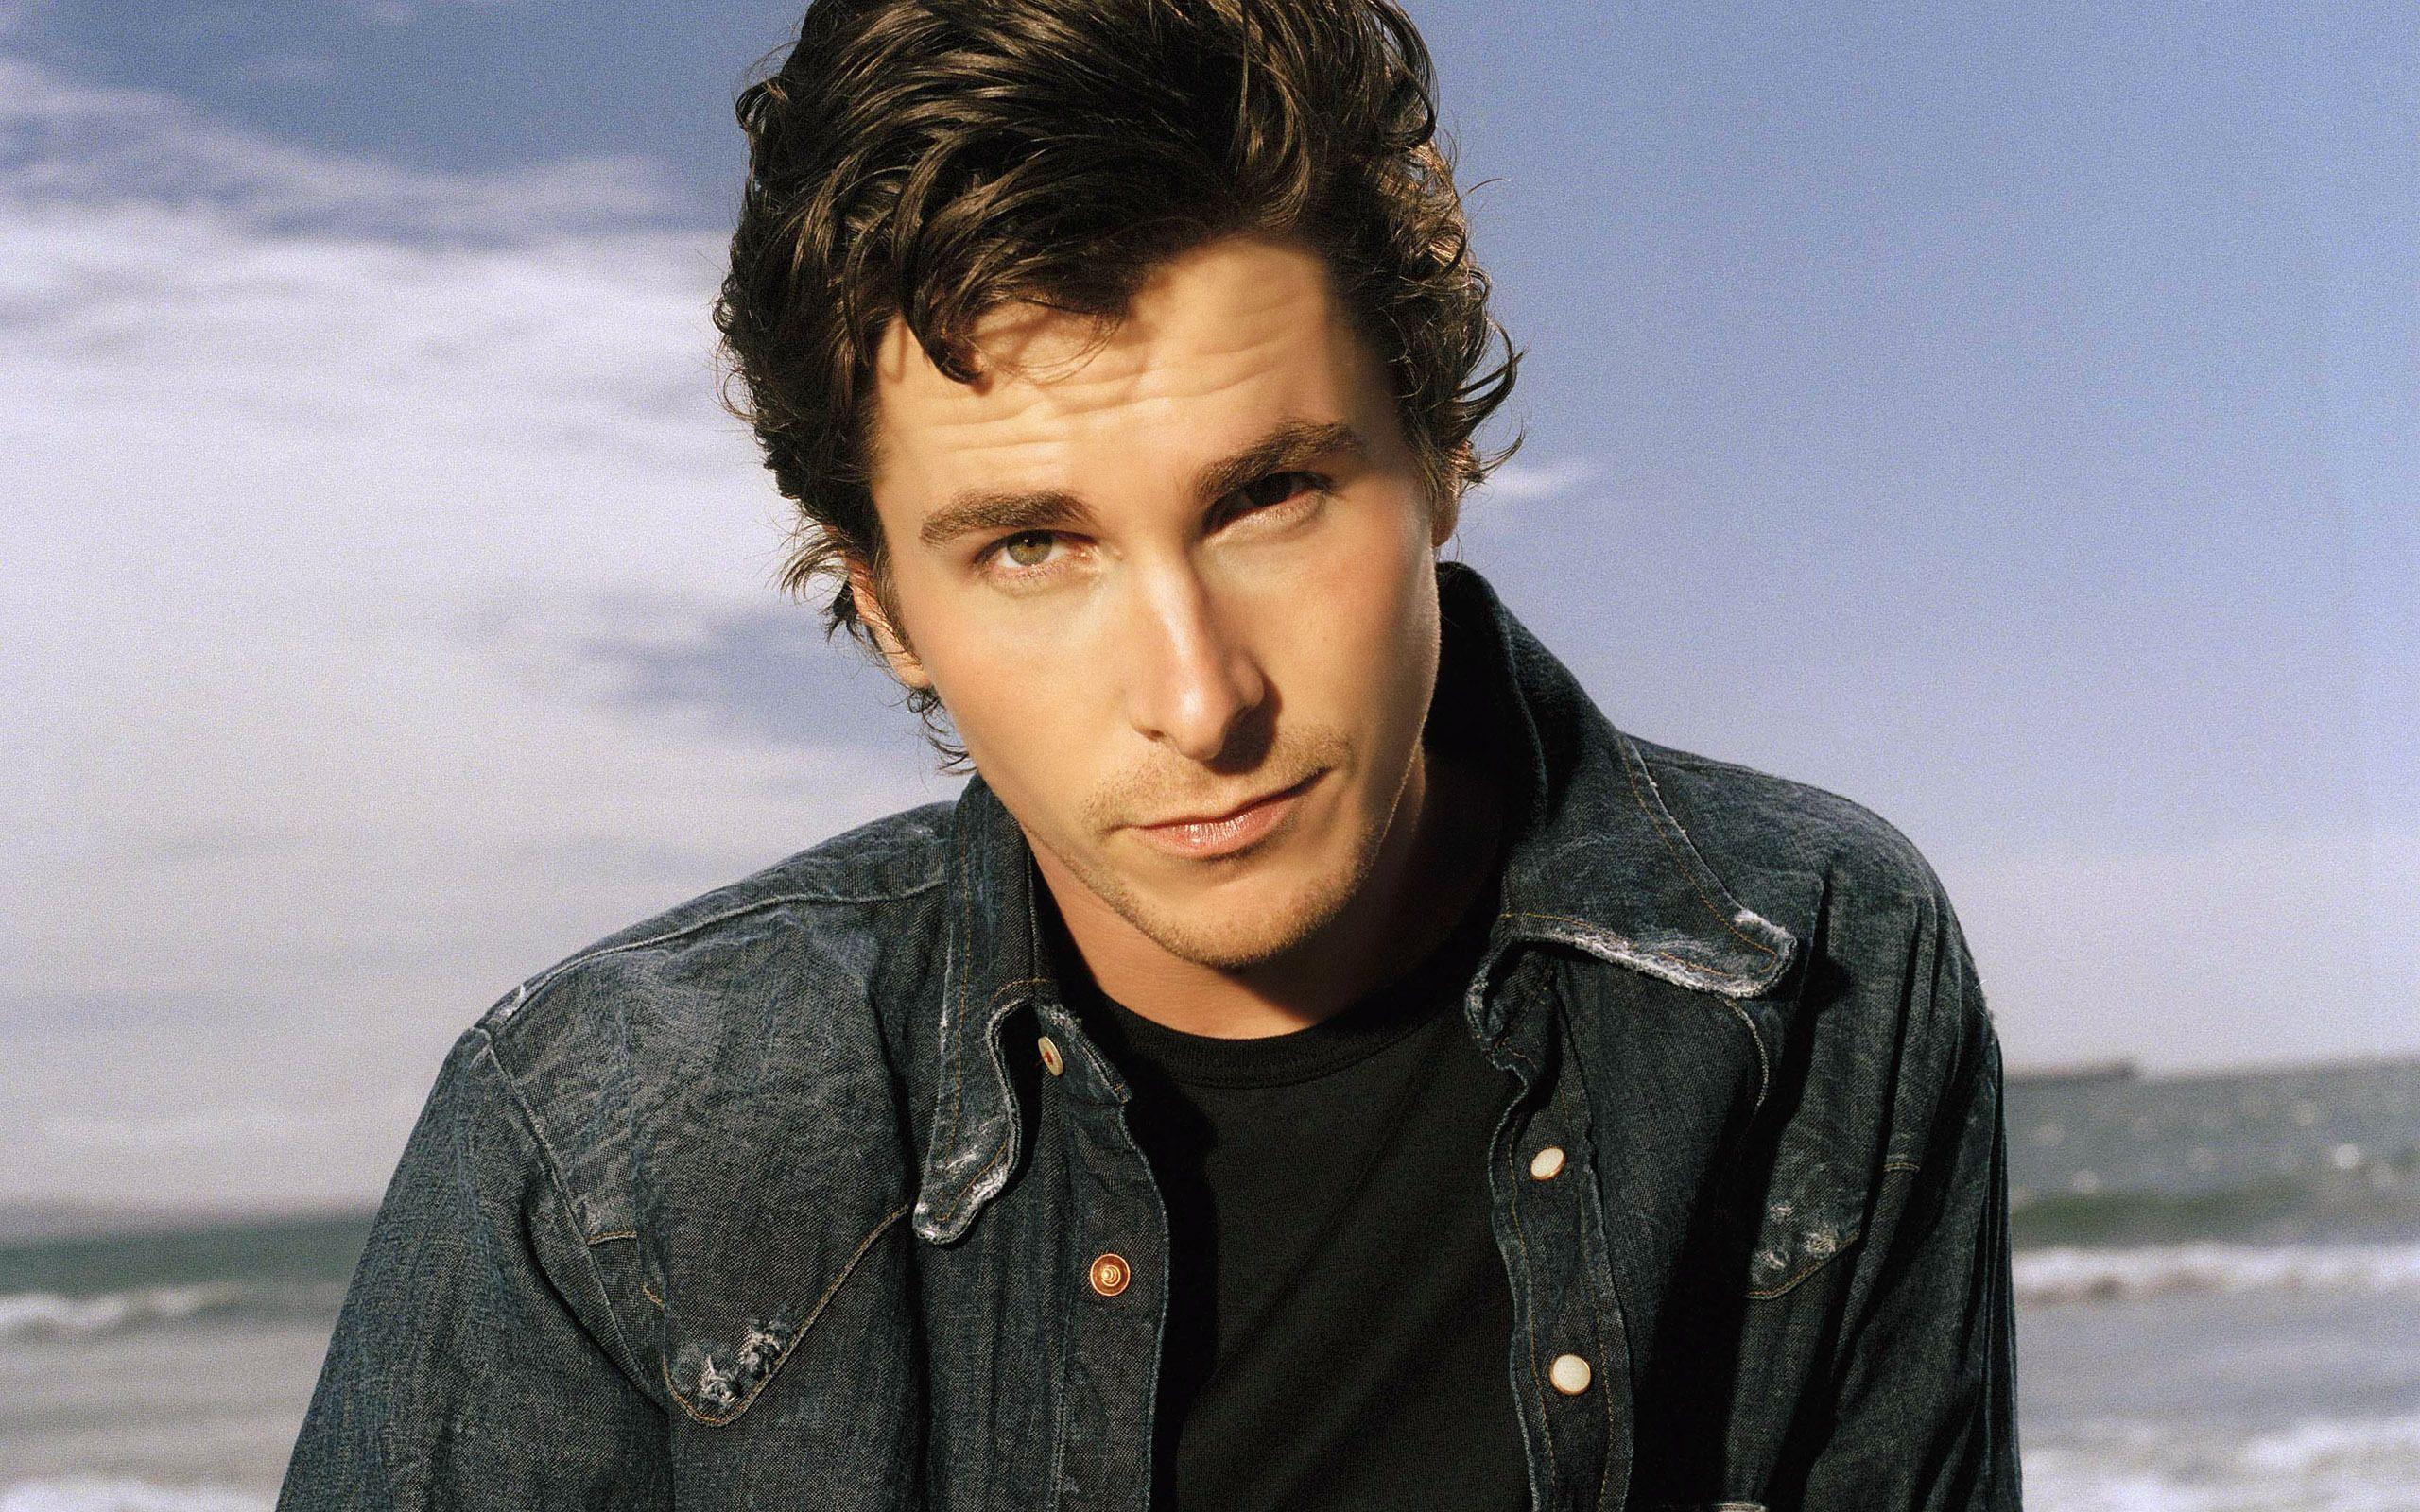 Christian Bale image Christian in Jean Jacket on the Beach